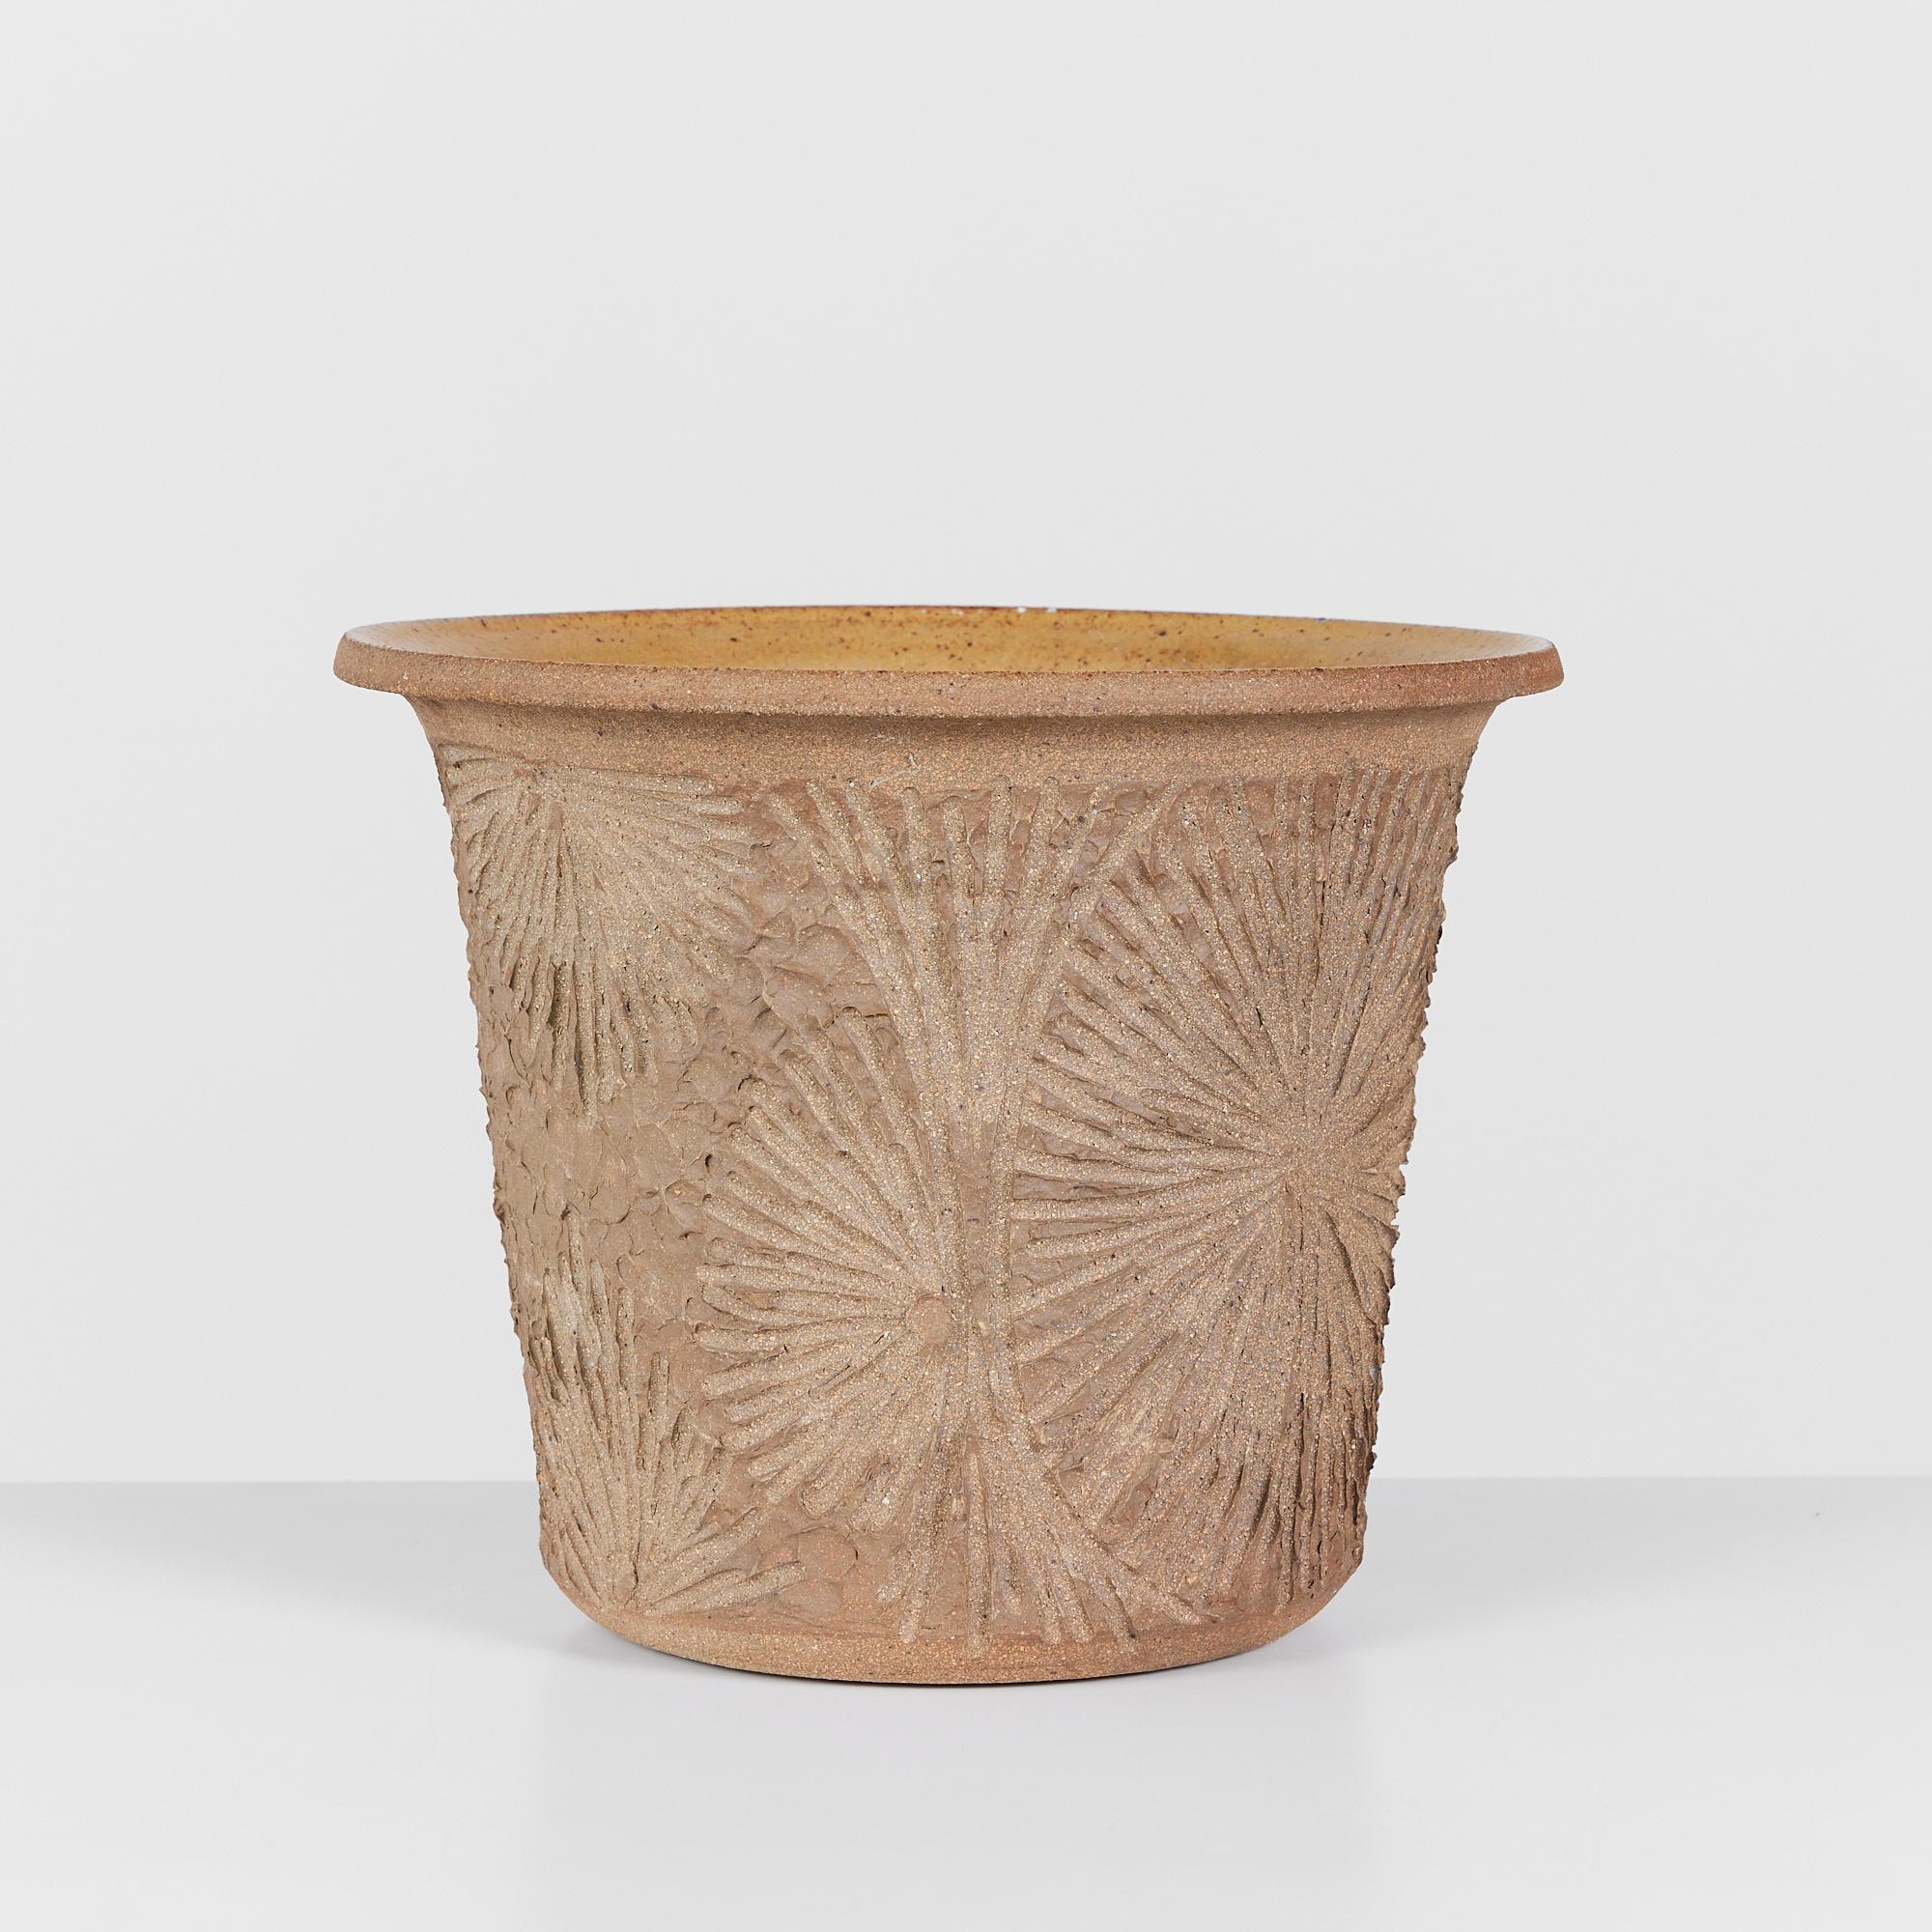 Hand thrown studio pottery planter by California ceramics artist Robert Maxwell, circa 1970s. This example has a tulip shape that flares at the lip. It is decorated with Maxwell's signature incised designs, of sunbursts and thumbprints. The interior